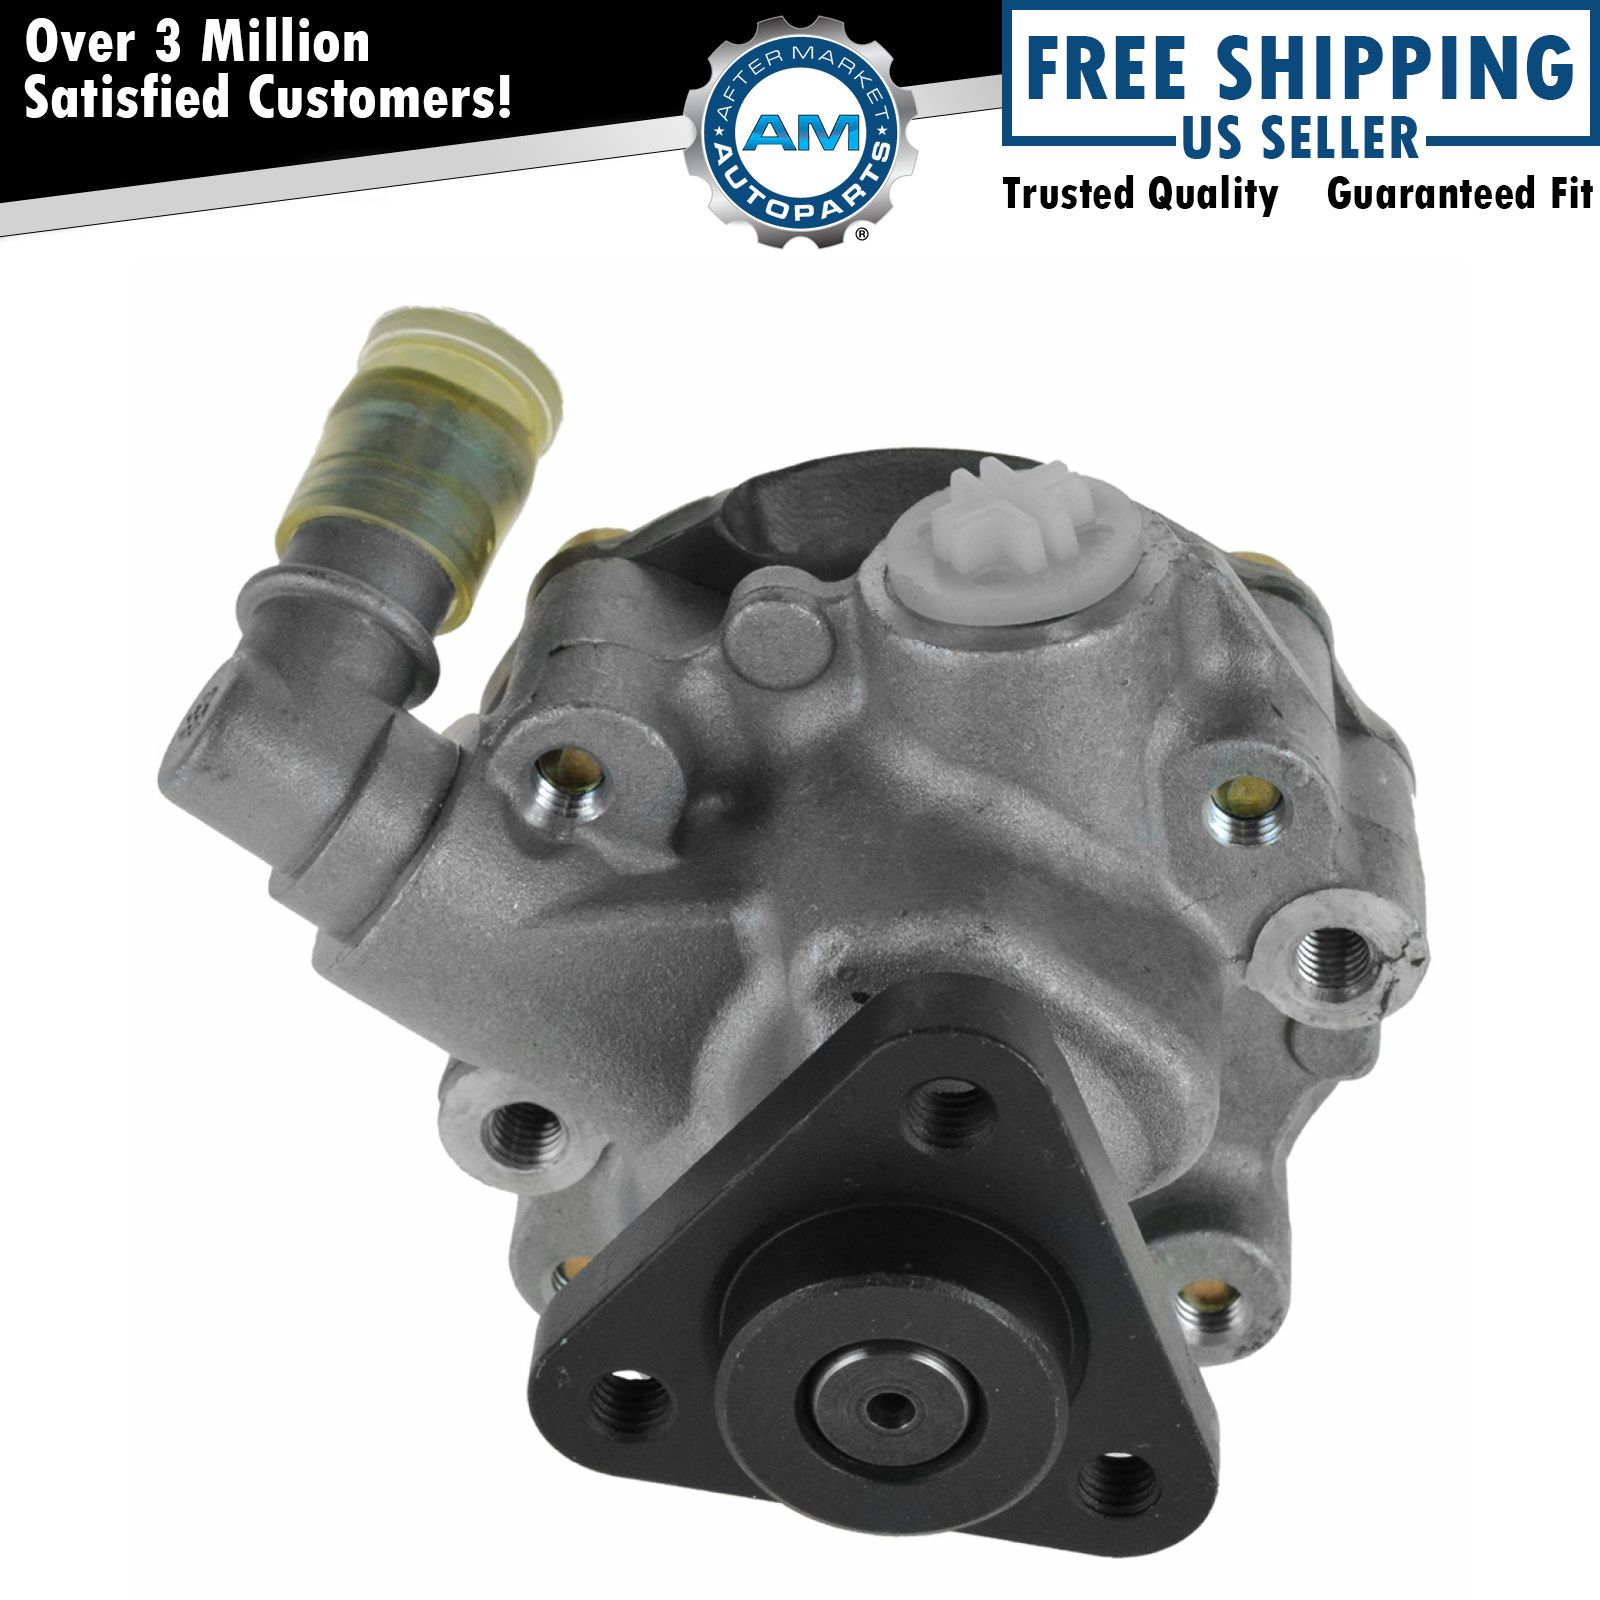 Brand New Power Steering Pump for BMW 3 Series 320 330 E46 00-07